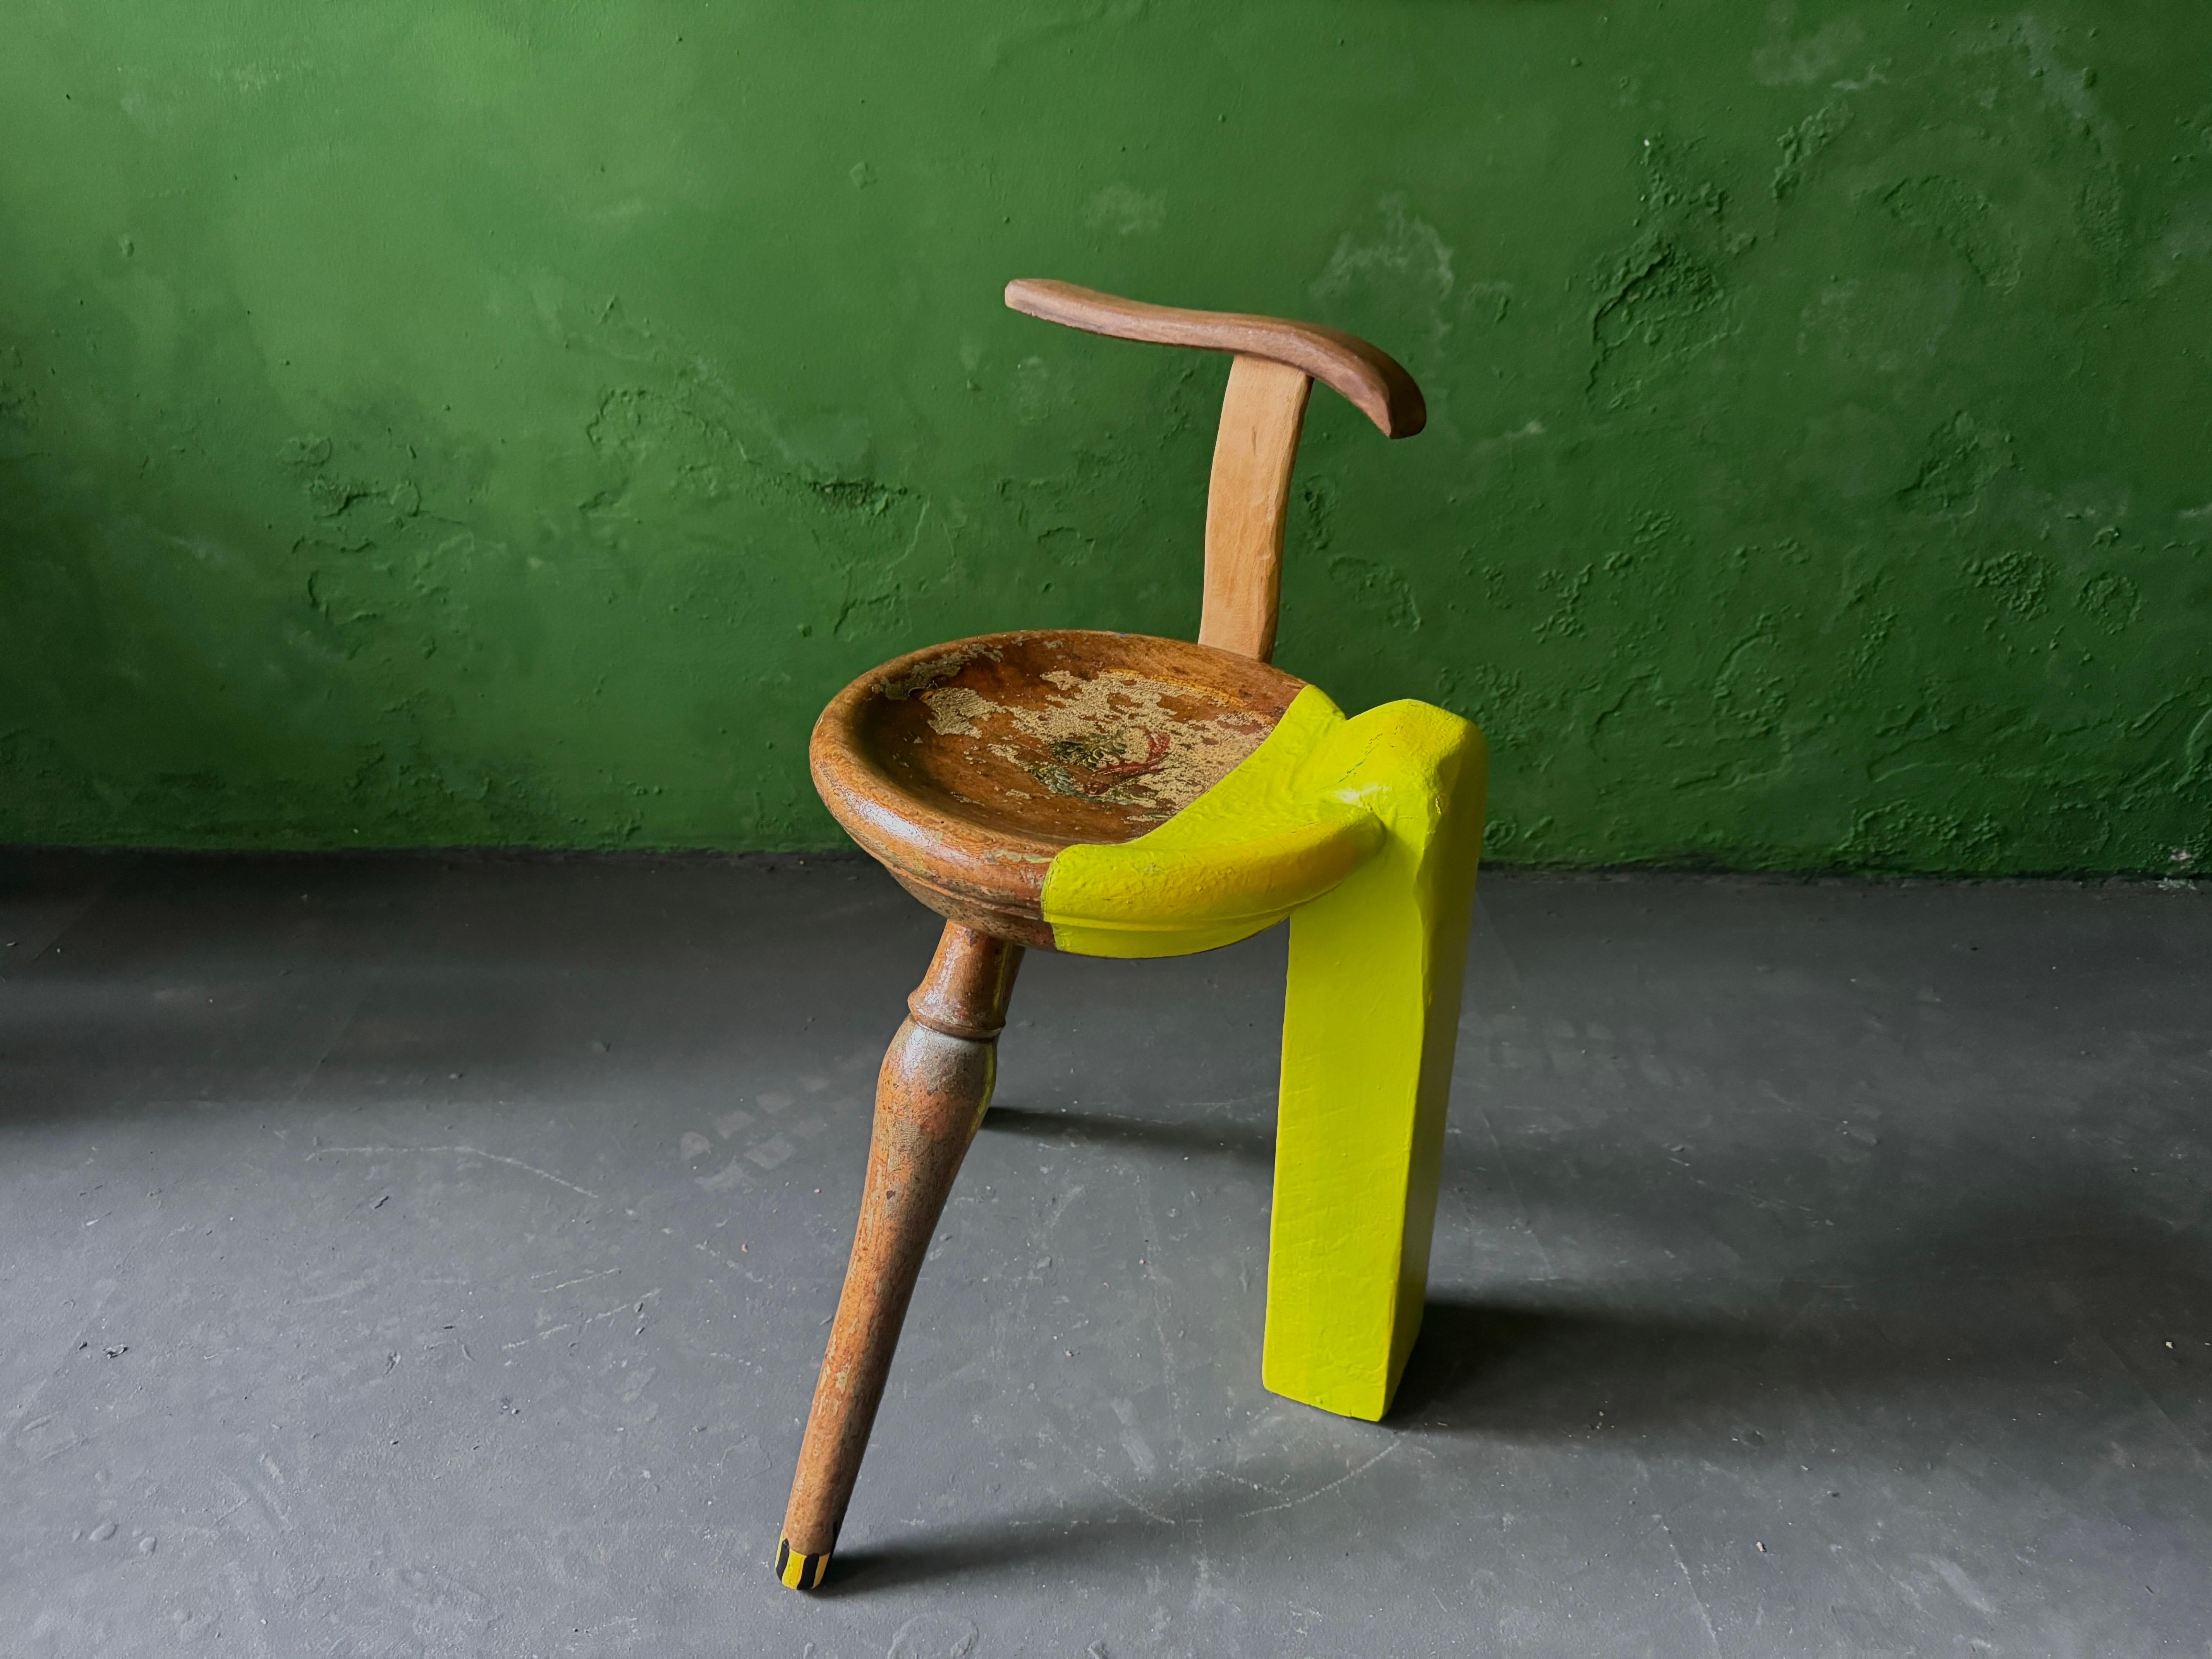 Lacquered Reality bites stool by Markus Friedrich Staab For Sale